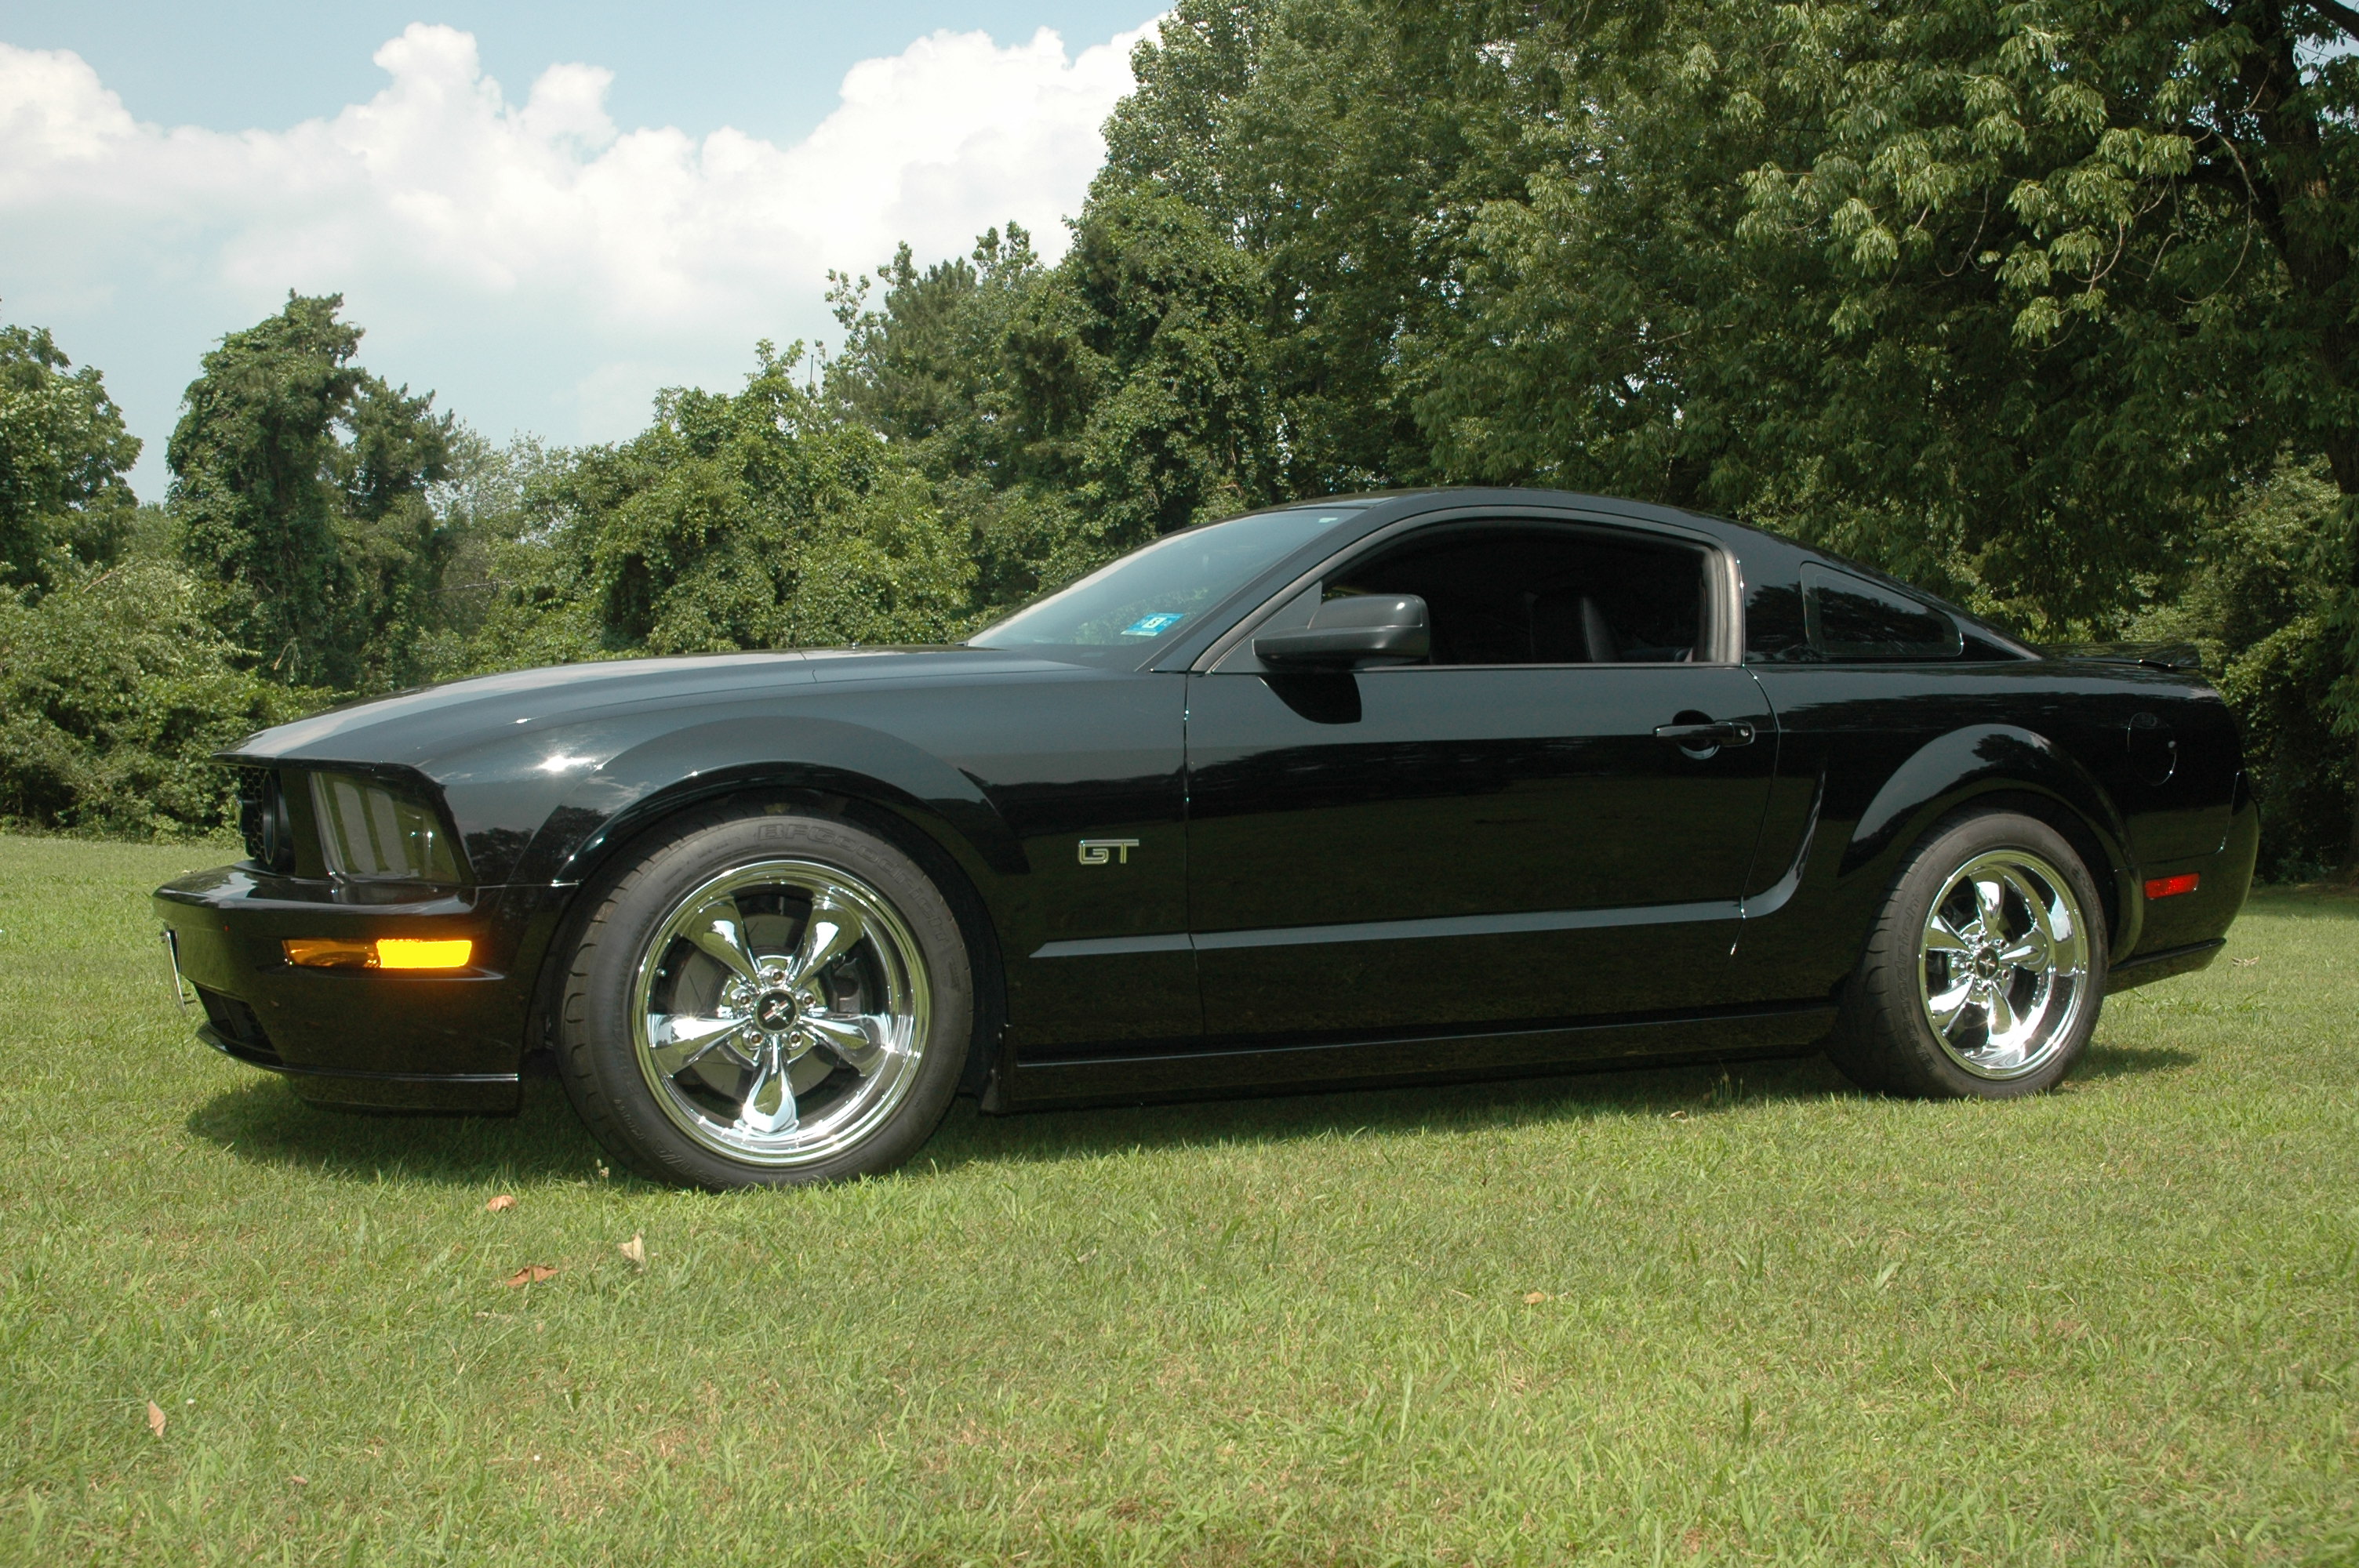  2006 Ford Mustang GT Coupe Automatic